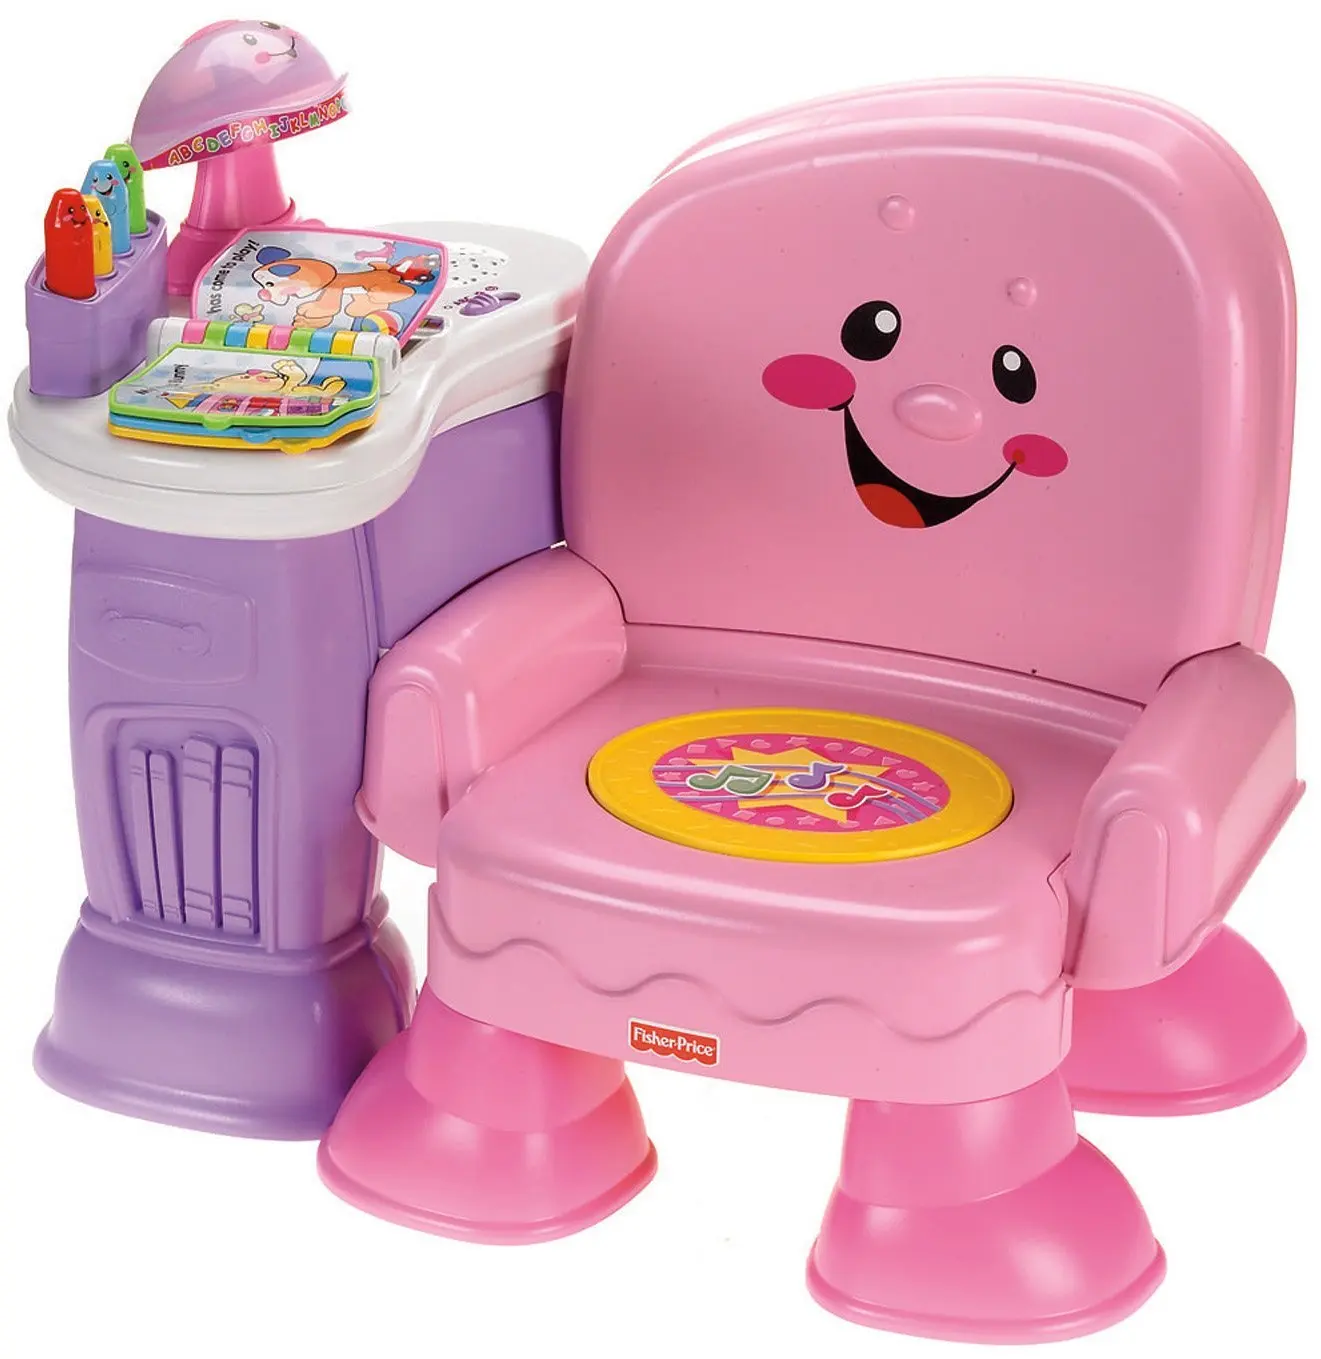 baby activity chair fisher price